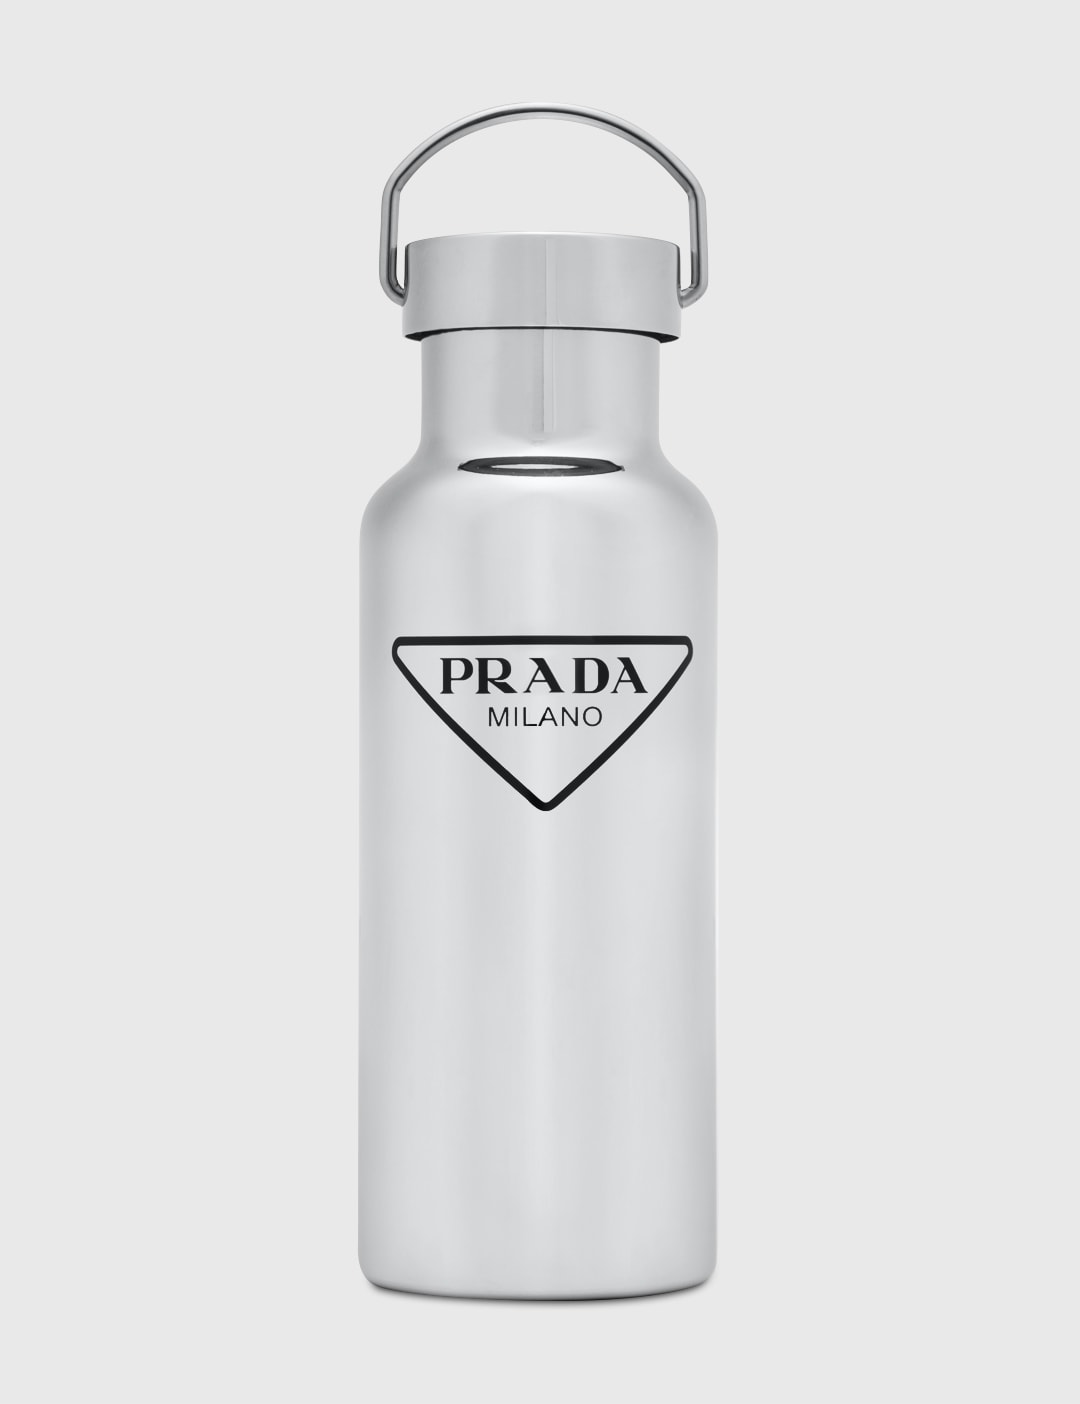 Prada - Stainless Steel Water Bottle (500 ml) | HBX - Globally Curated  Fashion and Lifestyle by Hypebeast